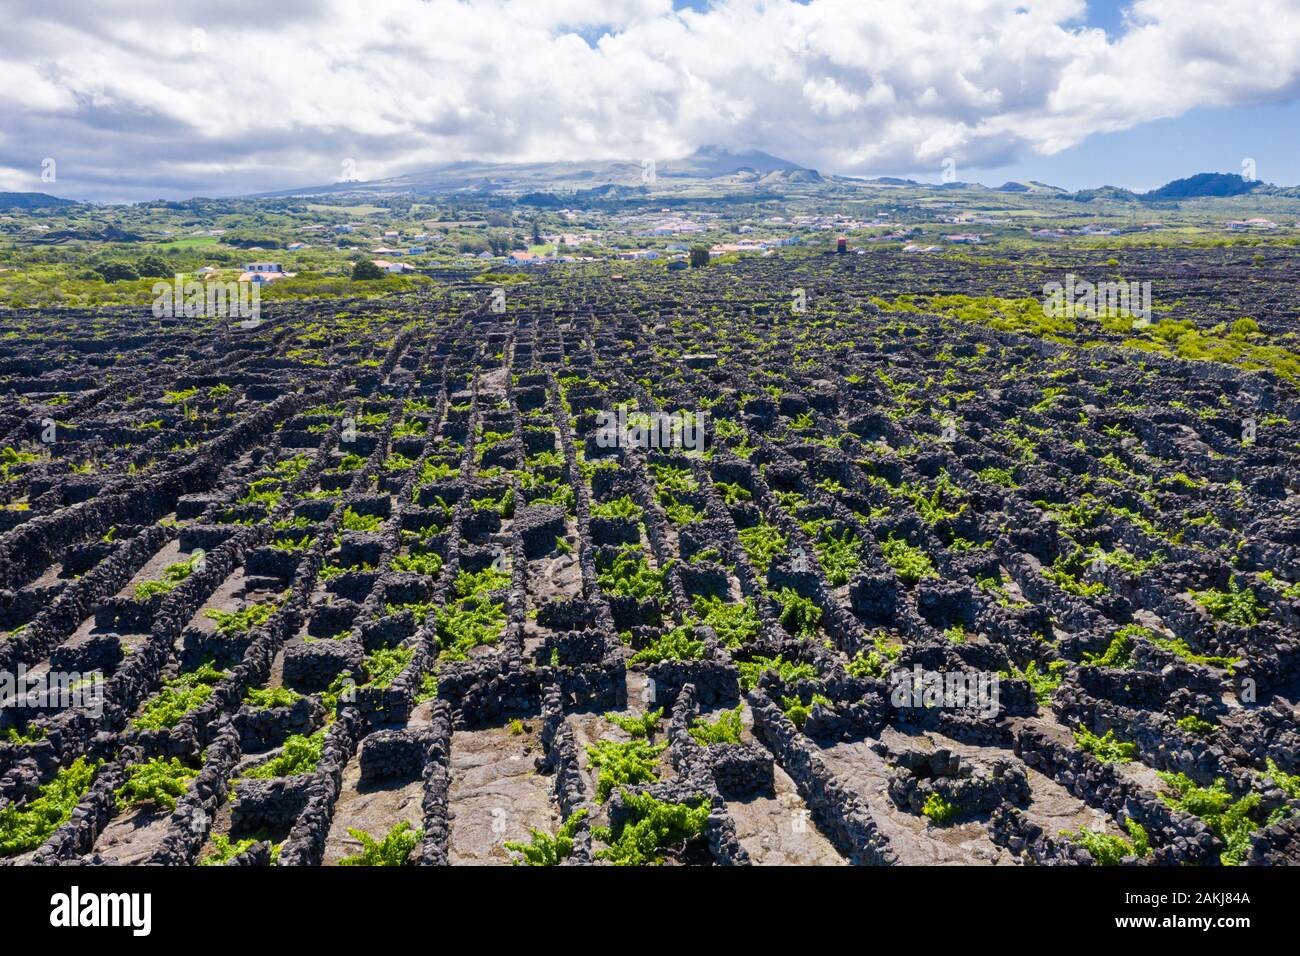 Man-made landscape of the Pico Island Vineyard Culture, Azores, Portugal. Pattern of spaced-out, long linear walls running inland from, and parallel t Stock Photo